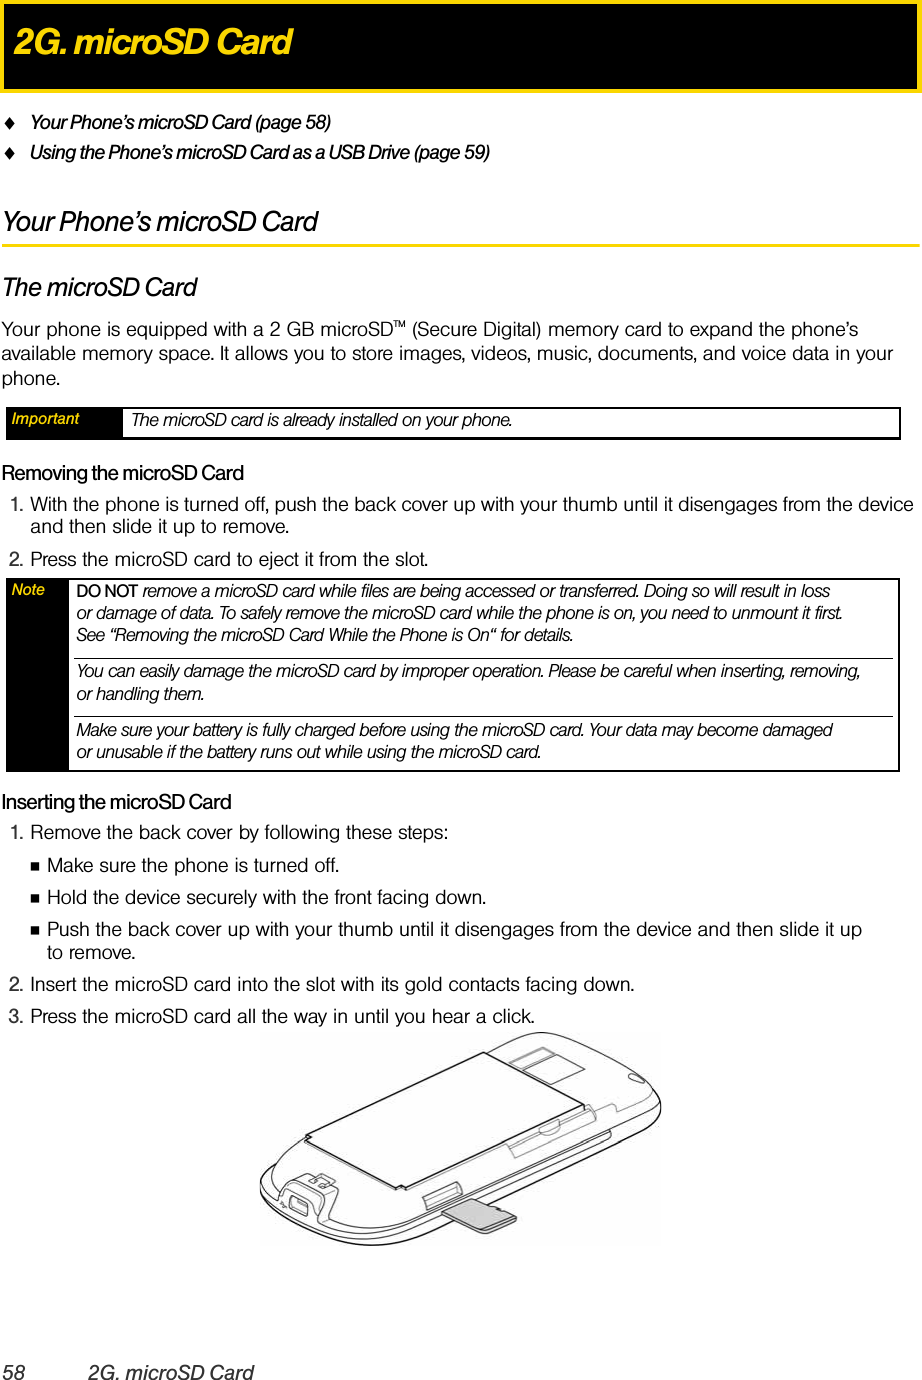 58 2G. microSD CardࡗYour Phone’s microSD Card (page 58)ࡗUsing the Phone’s microSD Card as a USB Drive (page 59)Your Phone’s microSD CardThe microSD CardYour phone is equipped with a 2 GB microSDTM (Secure Digital) memory card to expand the phone’s available memory space. It allows you to store images, videos, music, documents, and voice data in your phone.Removing the microSD Card1. With the phone is turned off, push the back cover up with your thumb until it disengages from the device and then slide it up to remove.2. Press the microSD card to eject it from the slot.Inserting the microSD Card1. Remove the back cover by following these steps:ⅢMake sure the phone is turned off.ⅢHold the device securely with the front facing down.ⅢPush the back cover up with your thumb until it disengages from the device and then slide it up to remove.2. Insert the microSD card into the slot with its gold contacts facing down.3. Press the microSD card all the way in until you hear a click.2G. microSD CardImportant The microSD card is already installed on your phone. Note DO NOT remove a microSD card while files are being accessed or transferred. Doing so will result in loss or damage of data. To safely remove the microSD card while the phone is on, you need to unmount it first. See “Removing the microSD Card While the Phone is On“ for details.You can easily damage the microSD card by improper operation. Please be careful when inserting, removing, or handling them.Make sure your battery is fully charged before using the microSD card. Your data may become damaged or unusable if the battery runs out while using the microSD card.